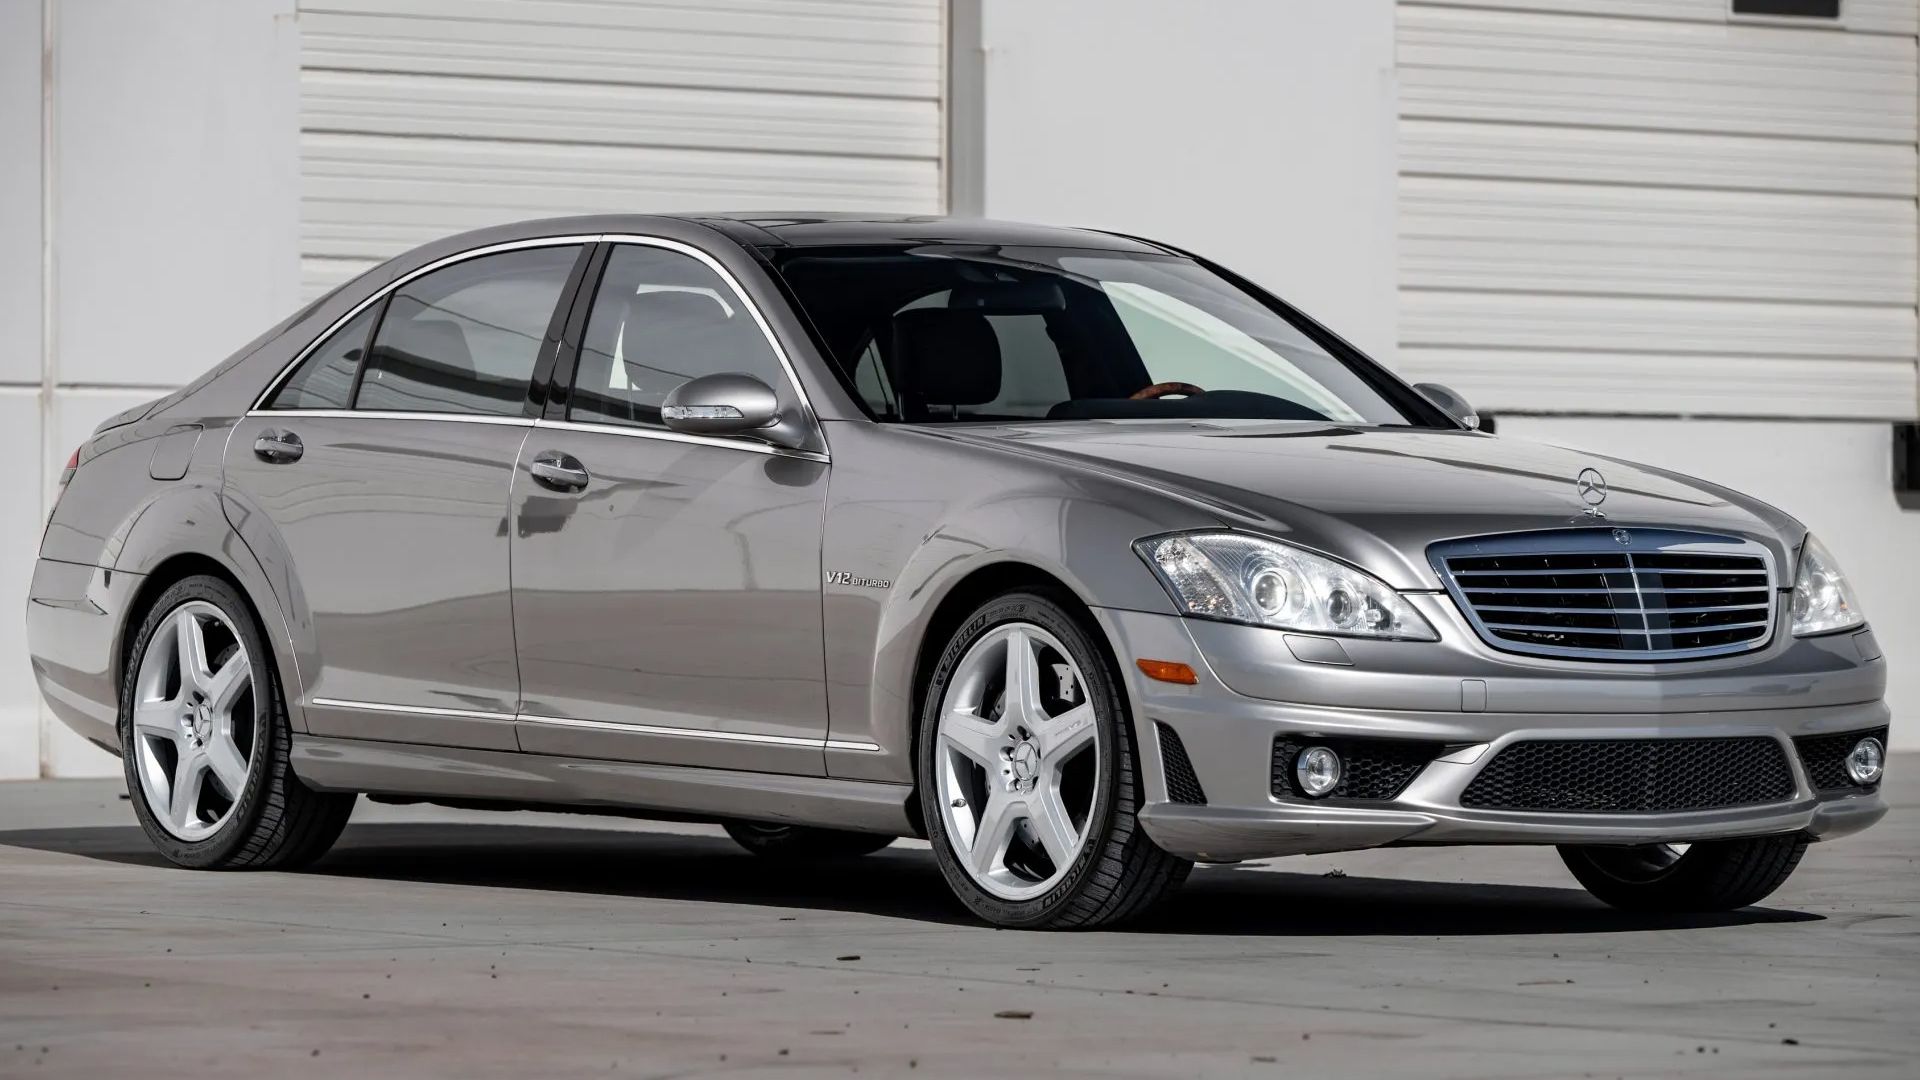 silver 2008 Mercedes-Benz S-Class S 65 AMG Sedan parked